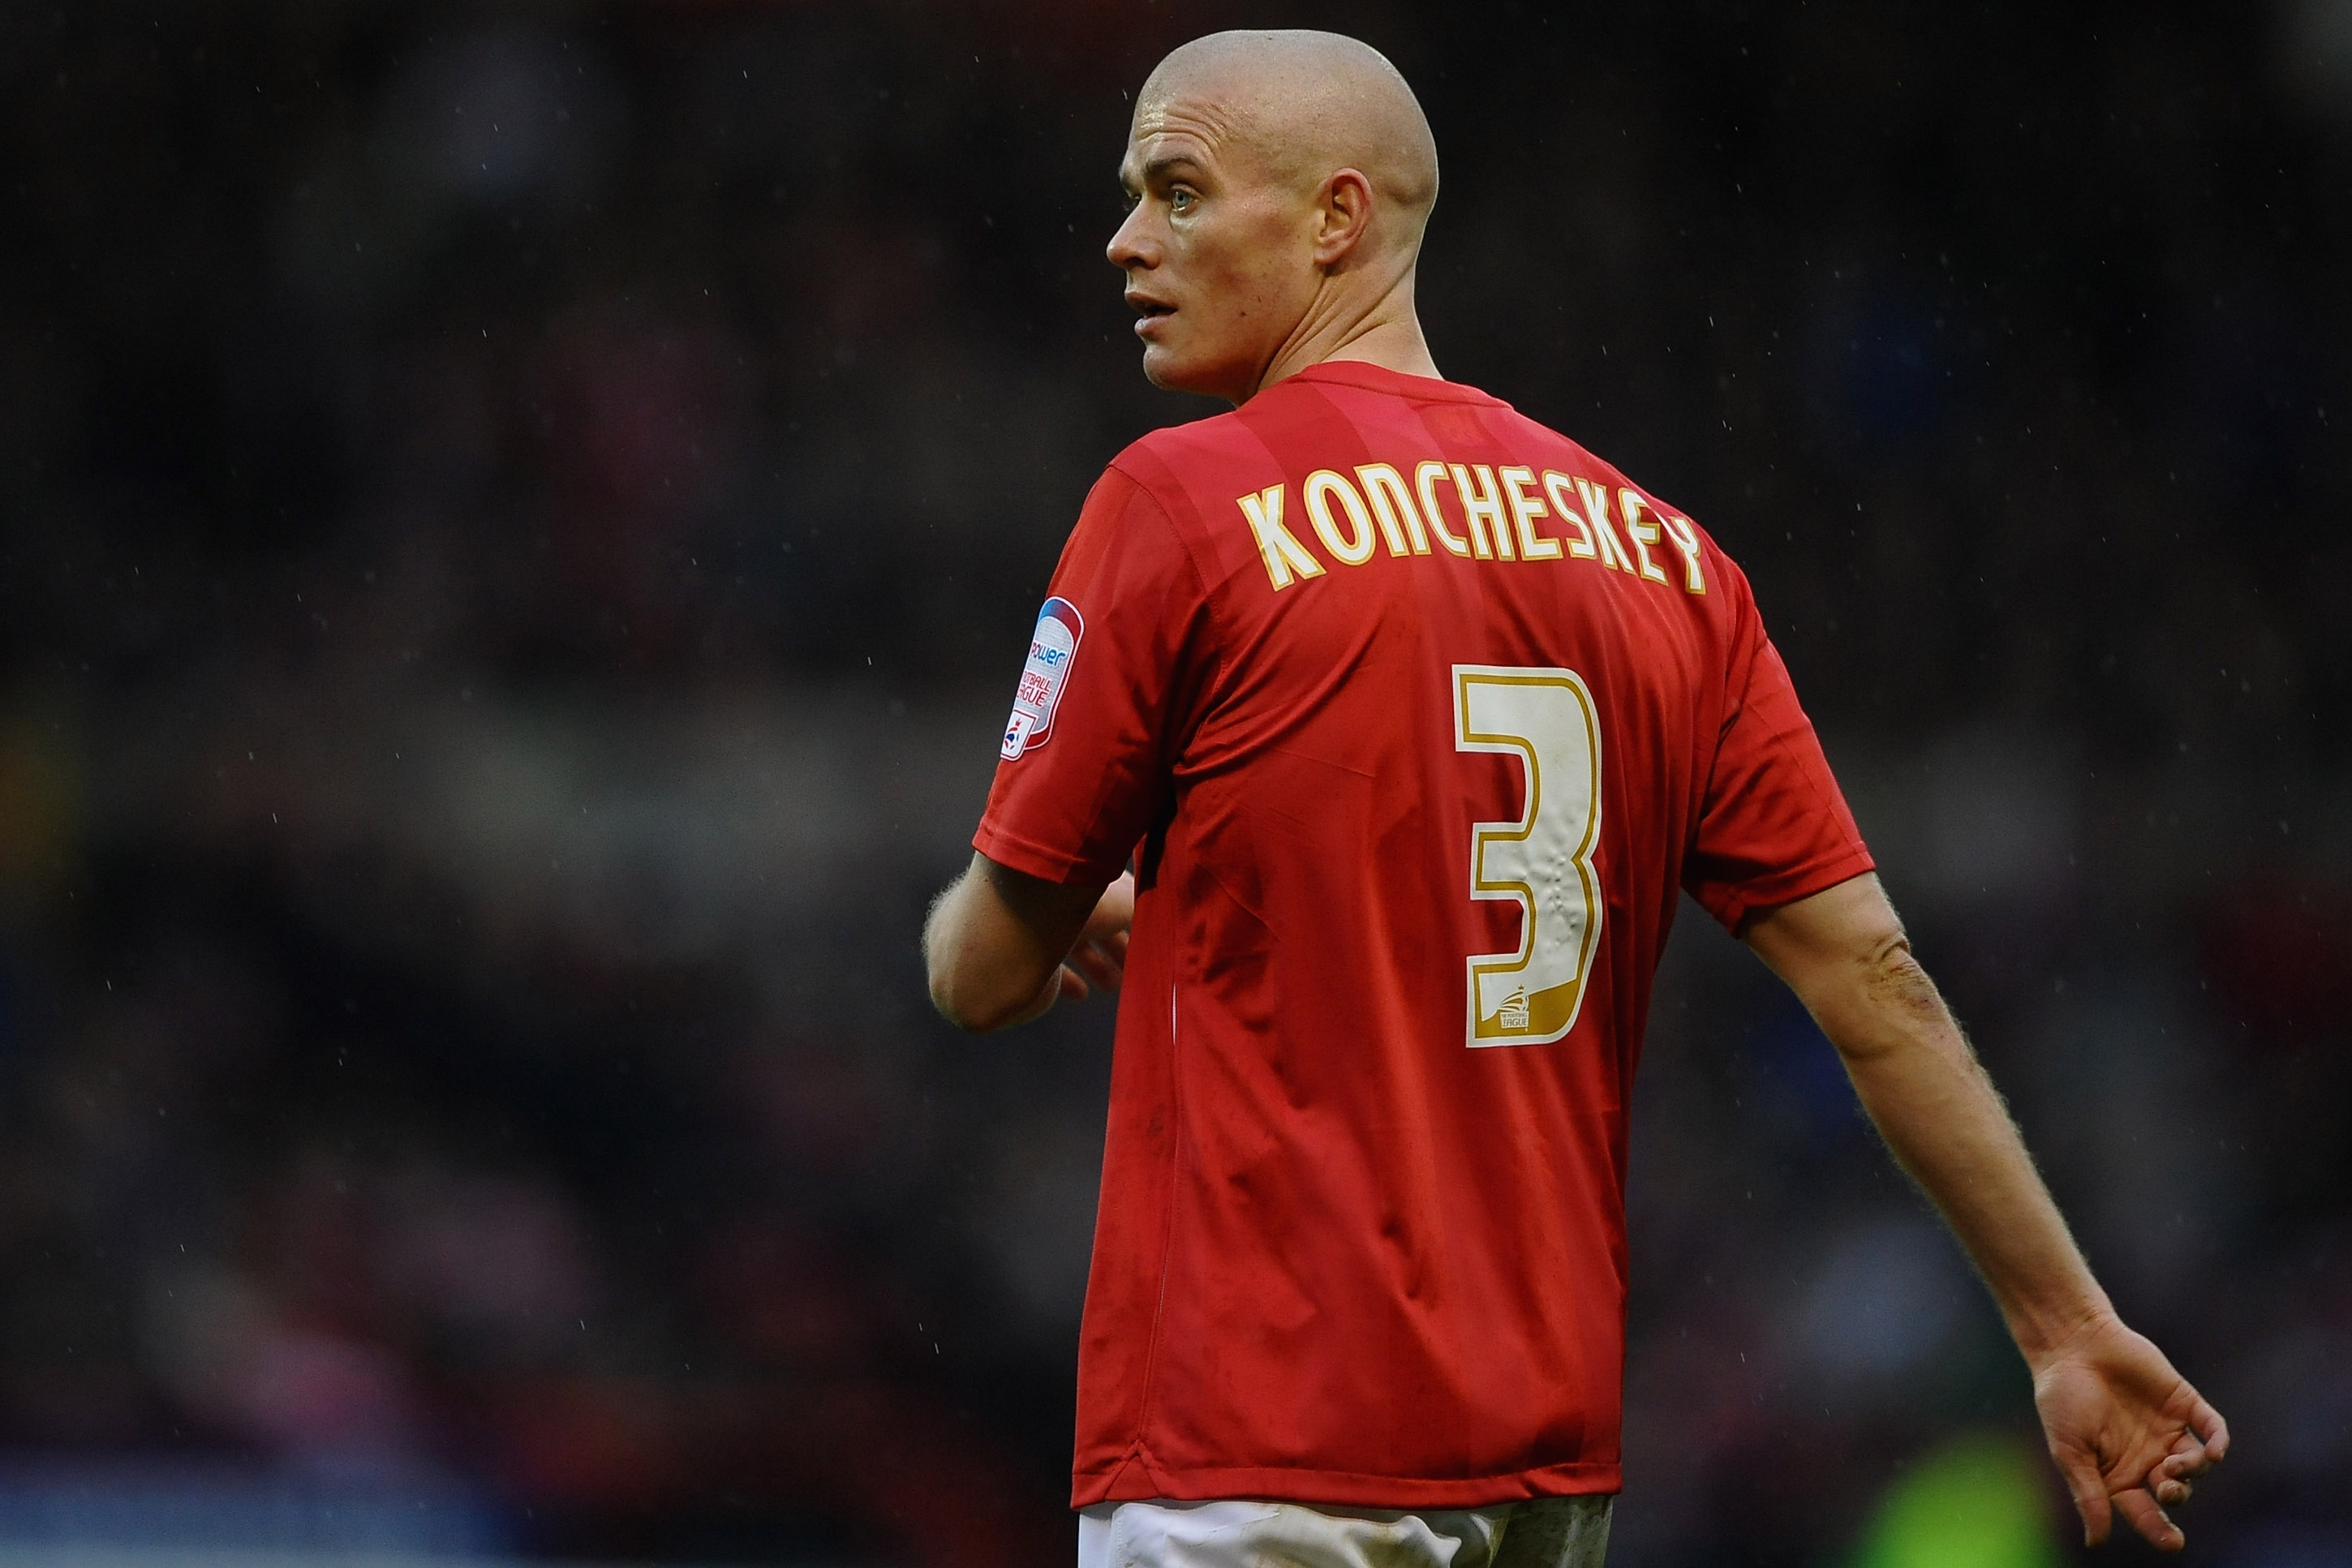 NOTTINGHAM, ENGLAND - FEBRUARY 05:  Paul Konchesky of Nottingham Forest in action during the npower Championship match between Nottingham Forest and Watford at City Ground on February 5, 2011 in Nottingham, England.  (Photo by Laurence Griffiths/Getty Ima